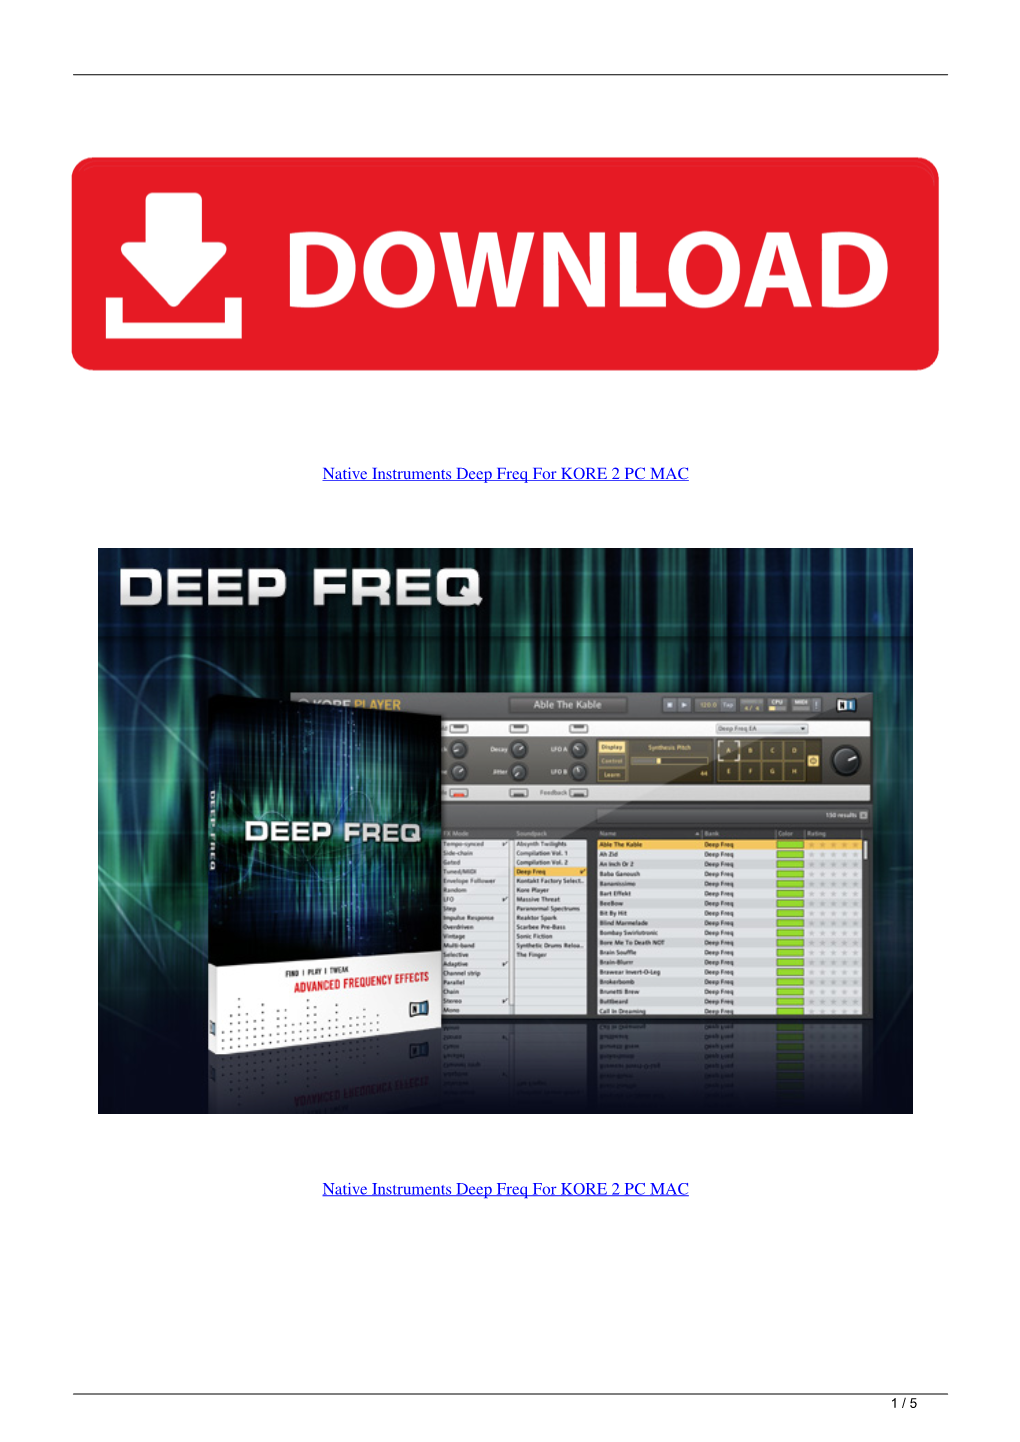 Native Instruments Deep Freq for KORE 2 PC MAC